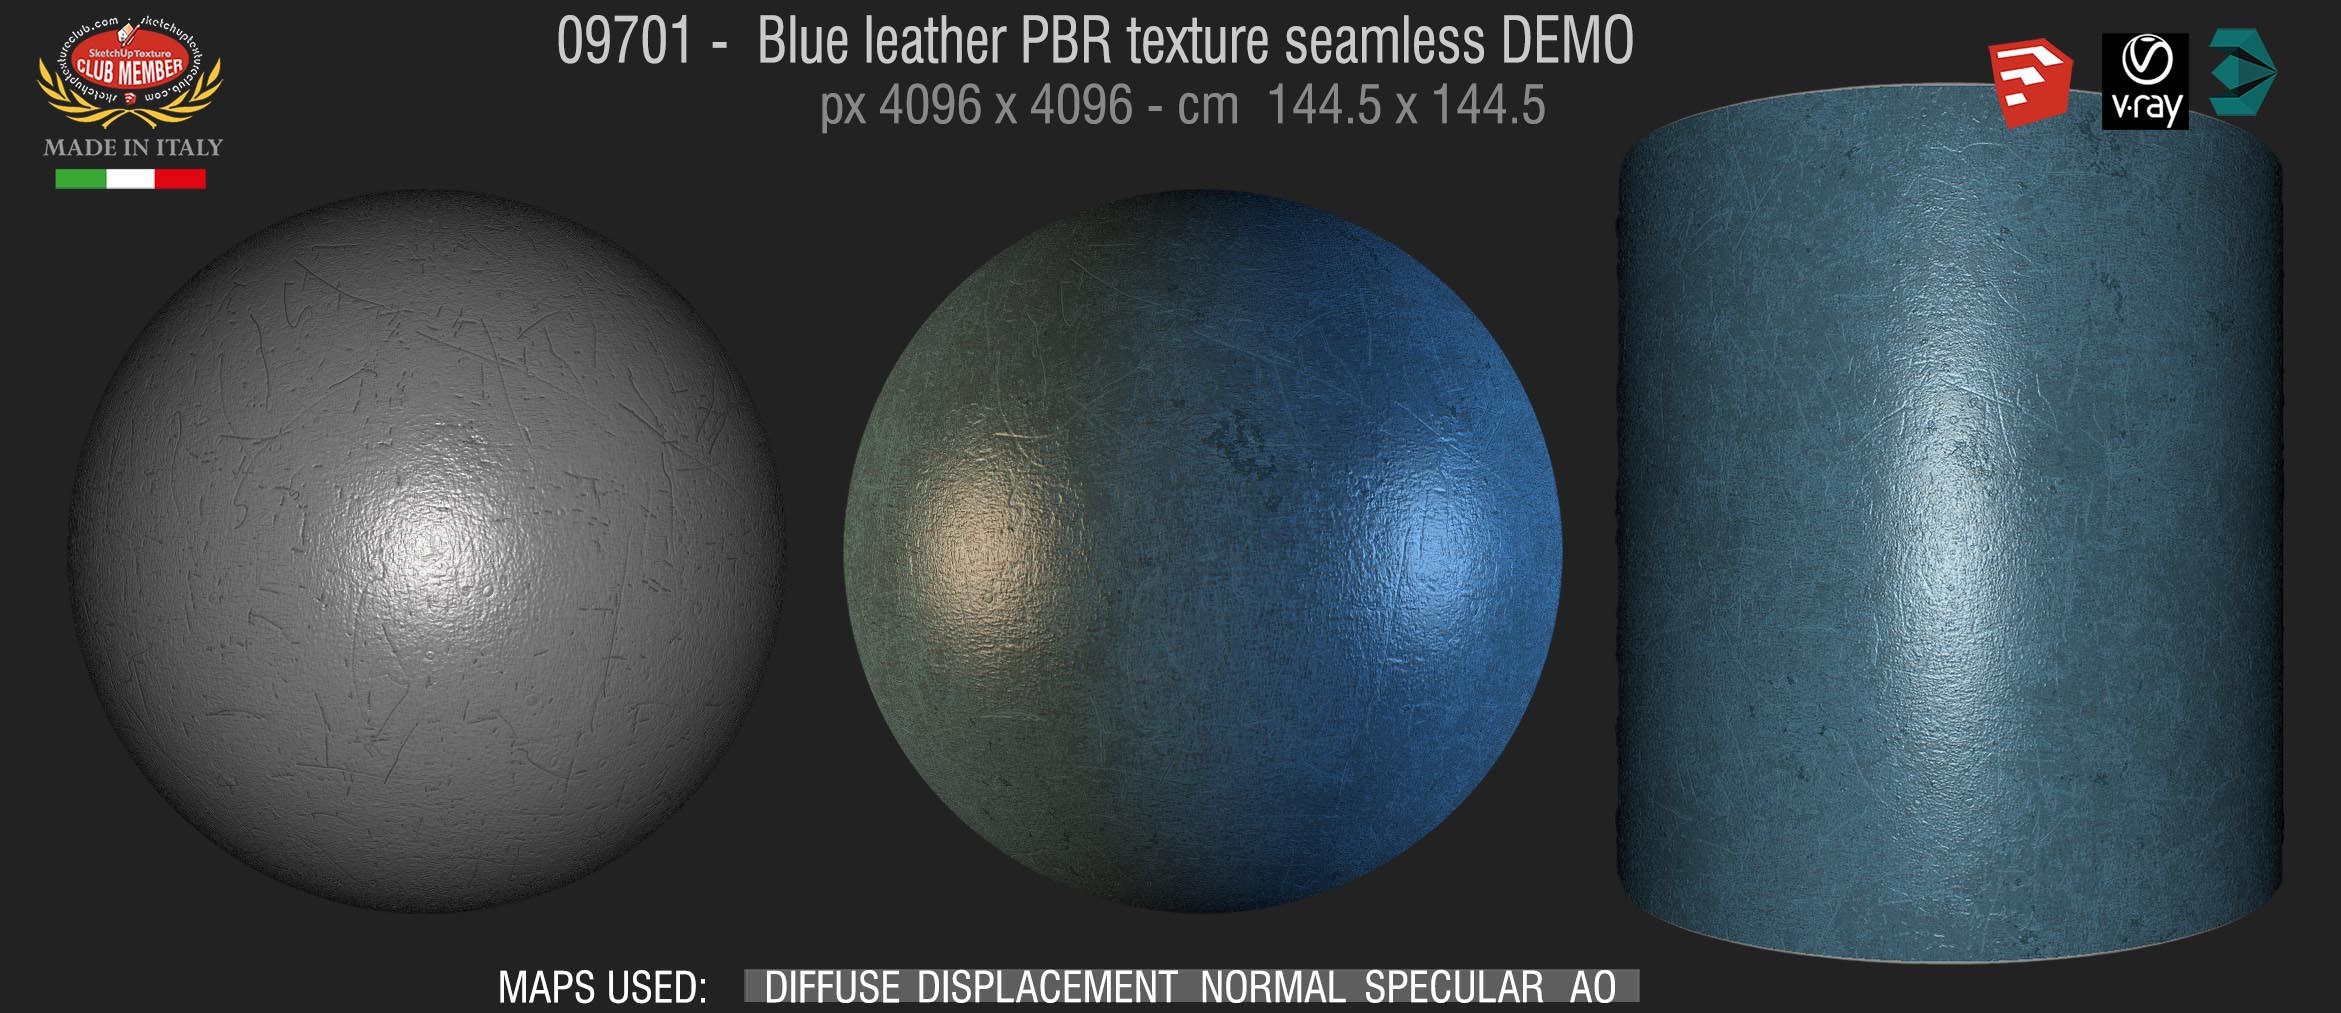 09701 Blue leather PBR texture seamless DEMO